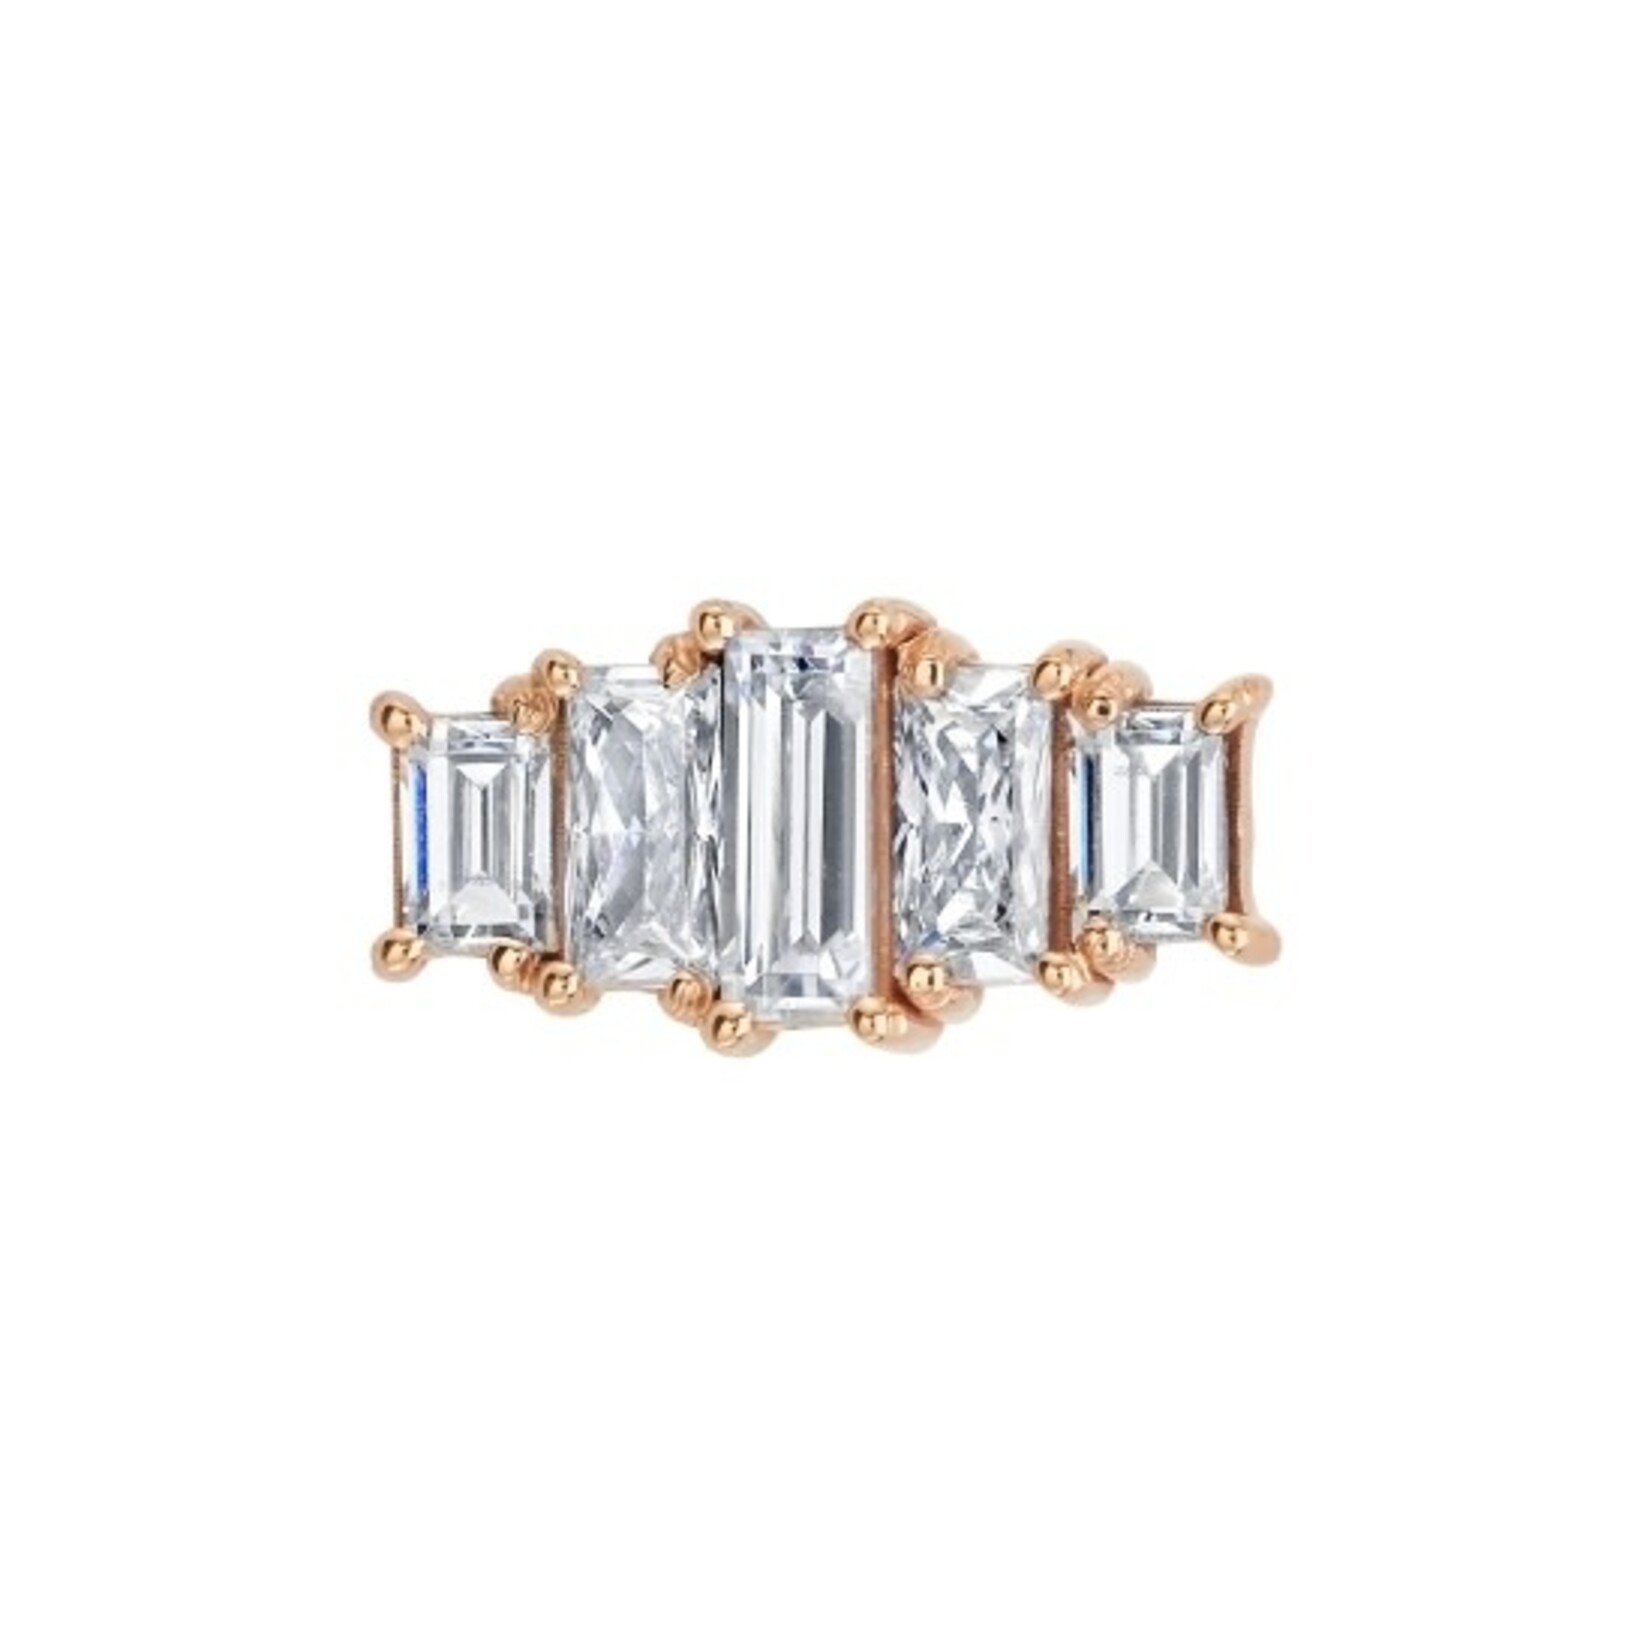 BVLA BVLA "Clara" threaded end with 2x 3x2 2x 4x2, and 5x2 CZ baguette